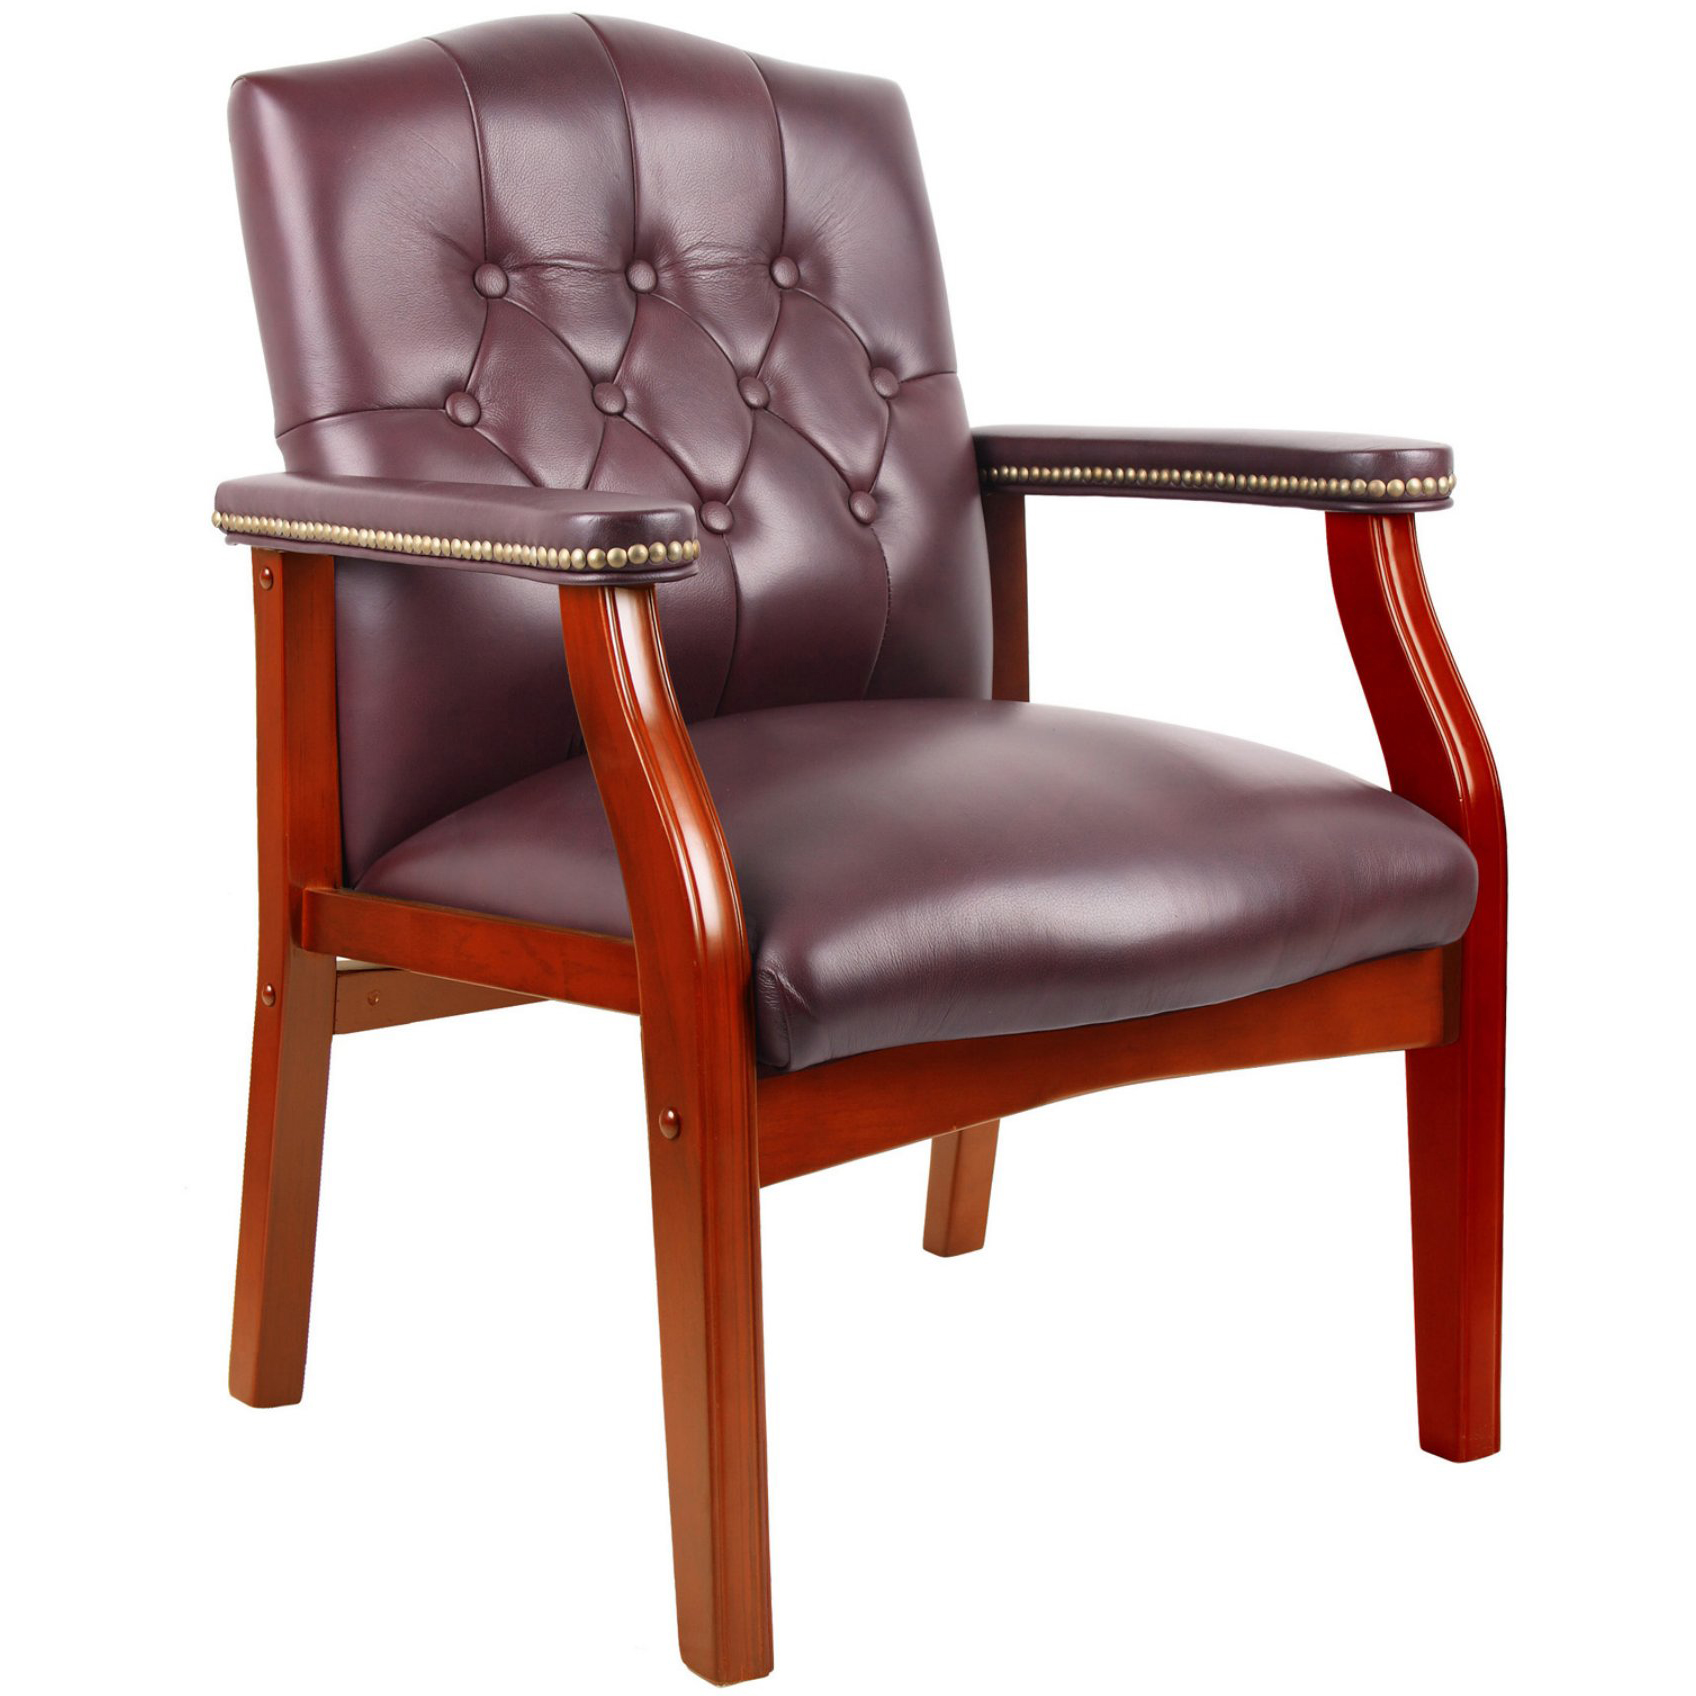 Office Chair In Burgundy Leather with Tufted Back in Cherry - image 2 of 3